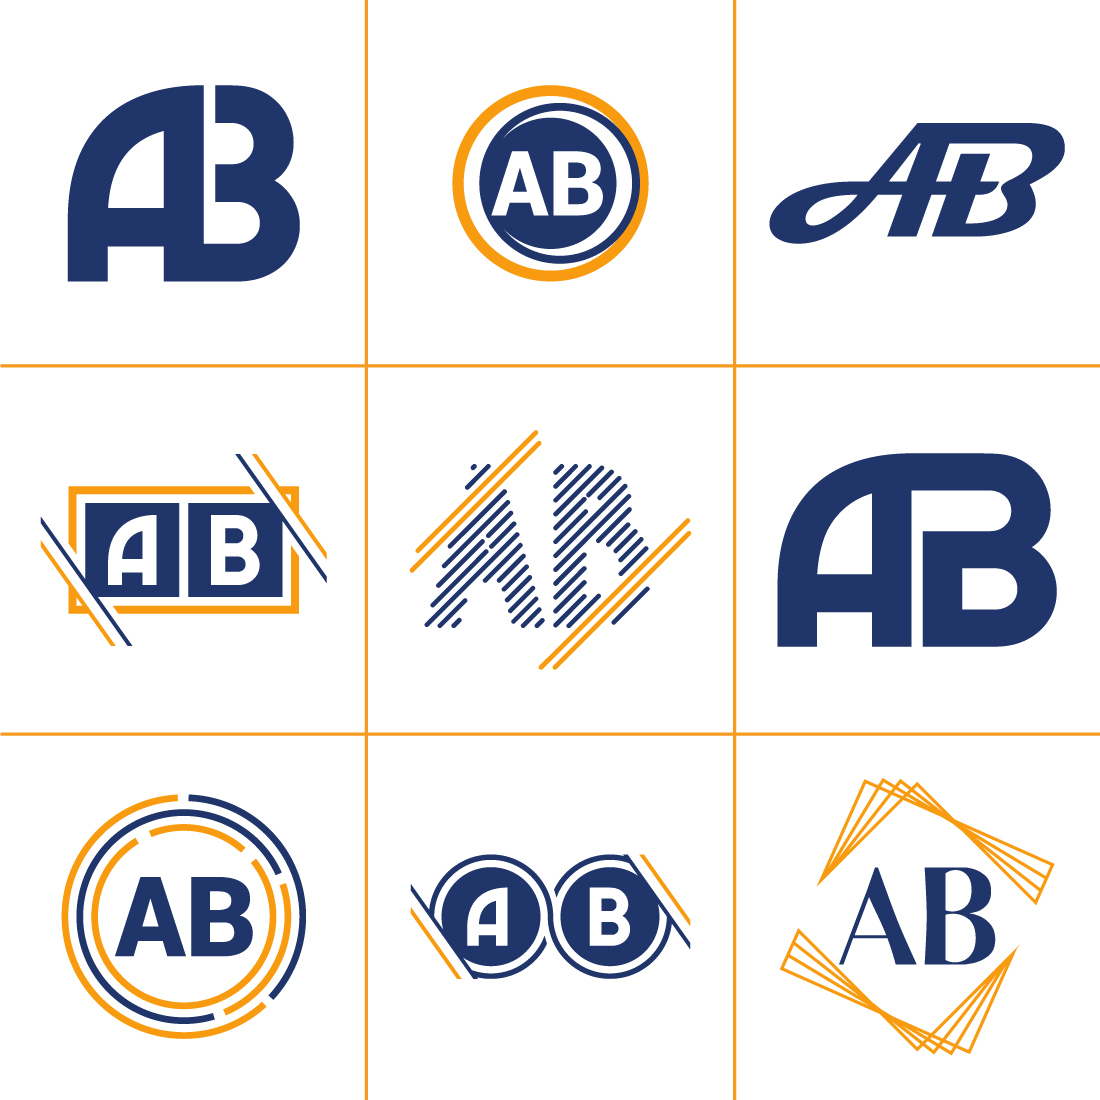 A B Initial Letter Logo Design cover image.